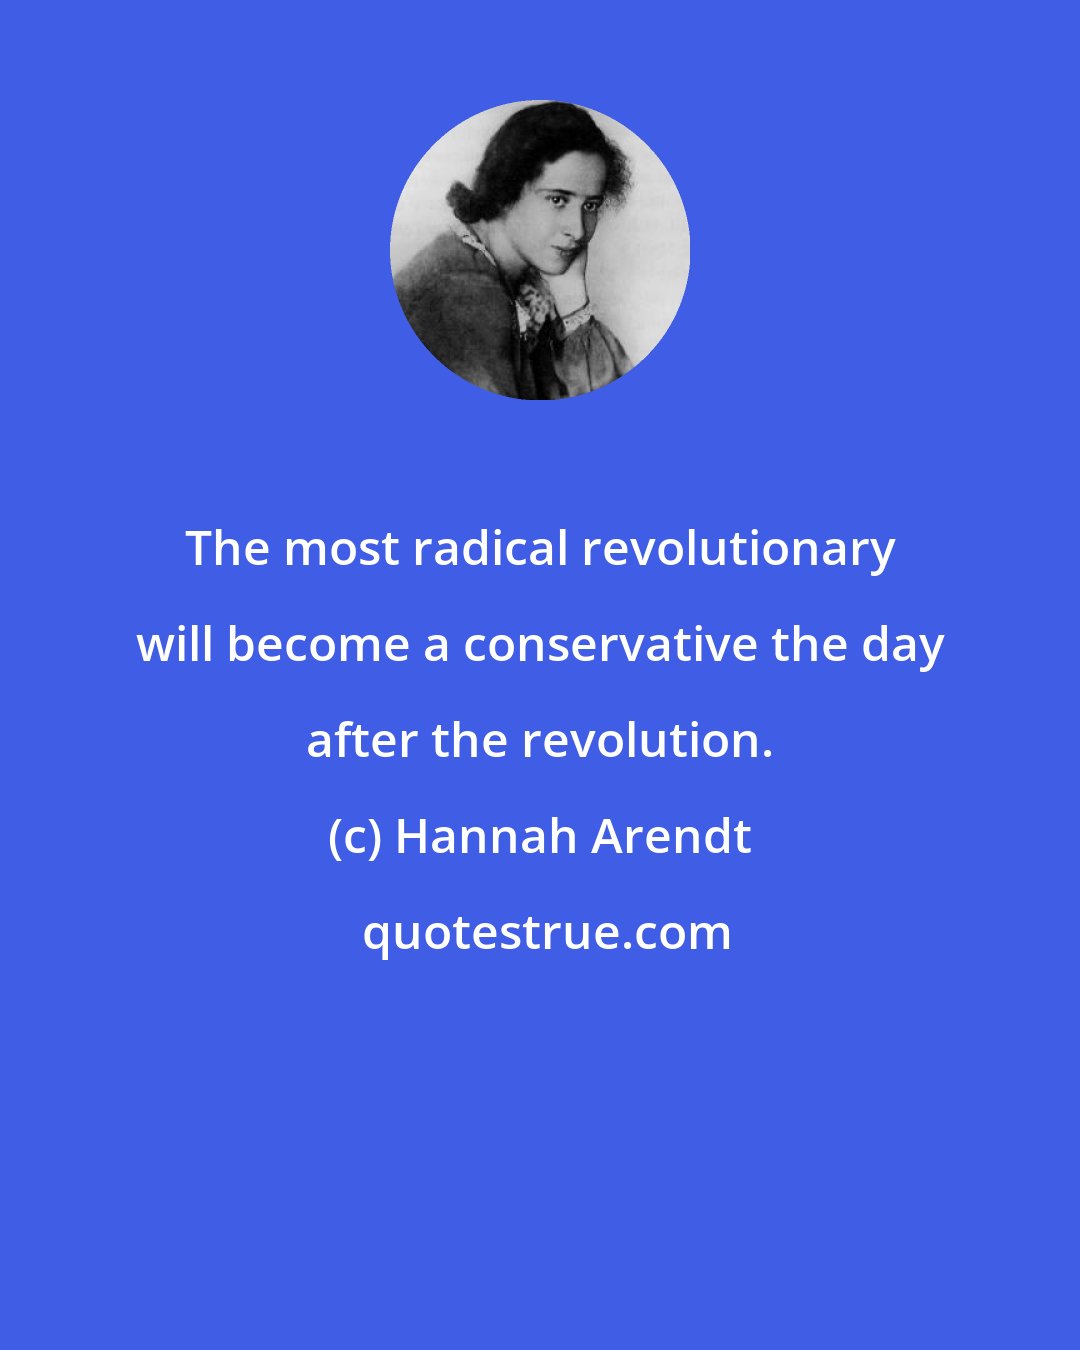 Hannah Arendt: The most radical revolutionary will become a conservative the day after the revolution.